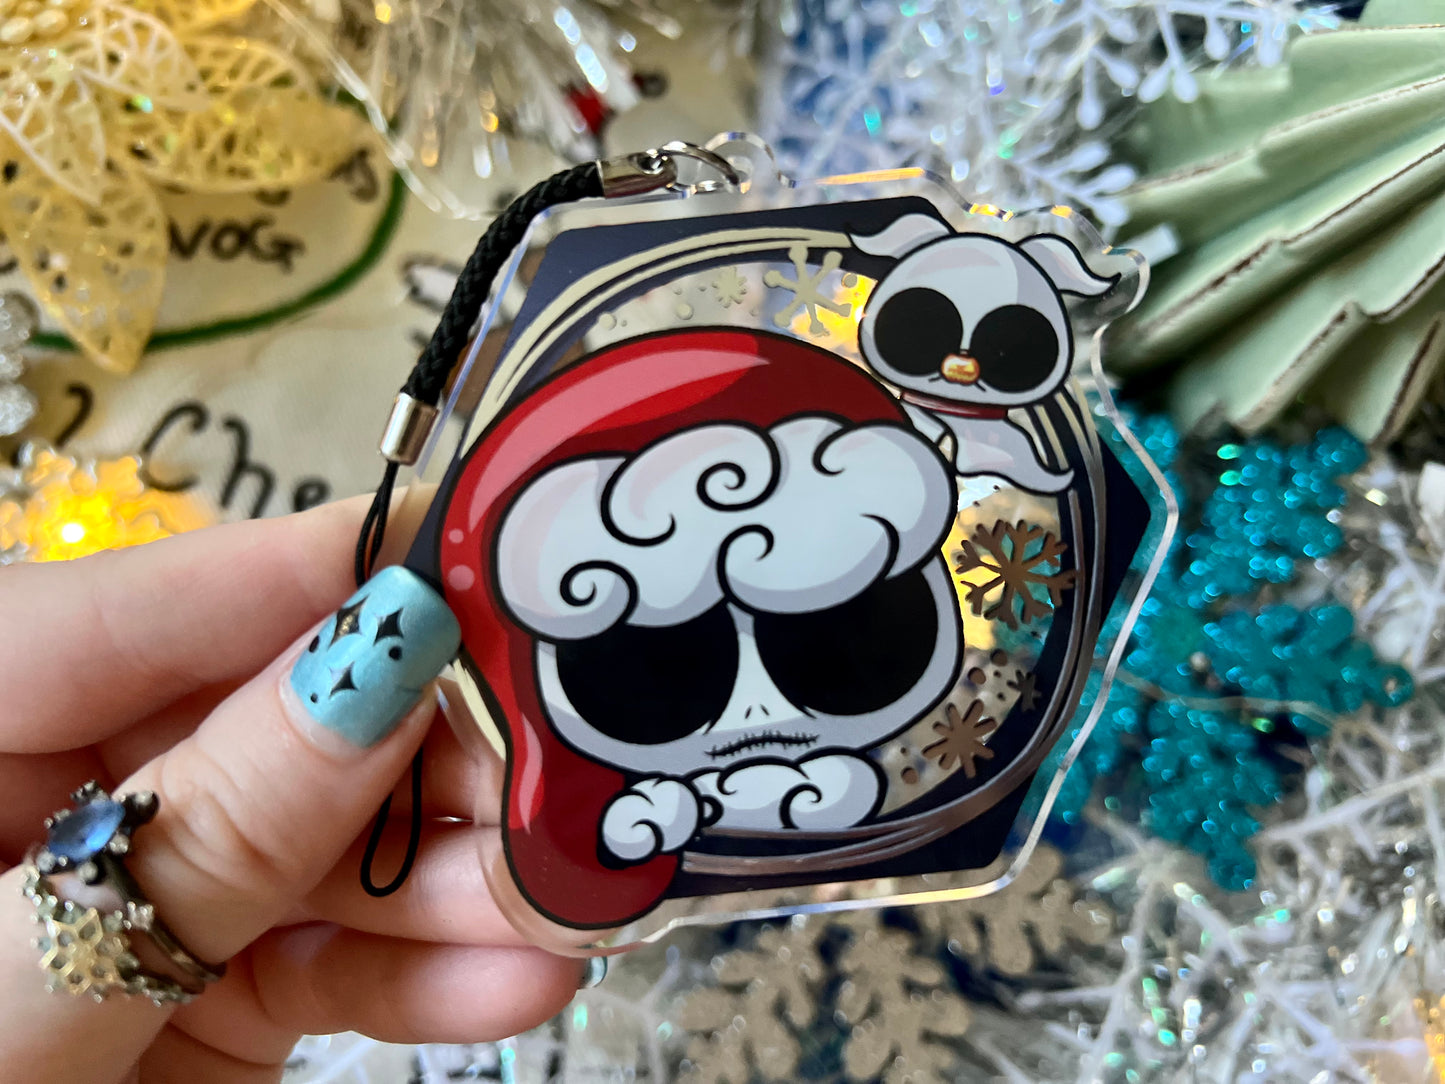 Sandy Claws - Ornament & Hot Chocolate Collaboration